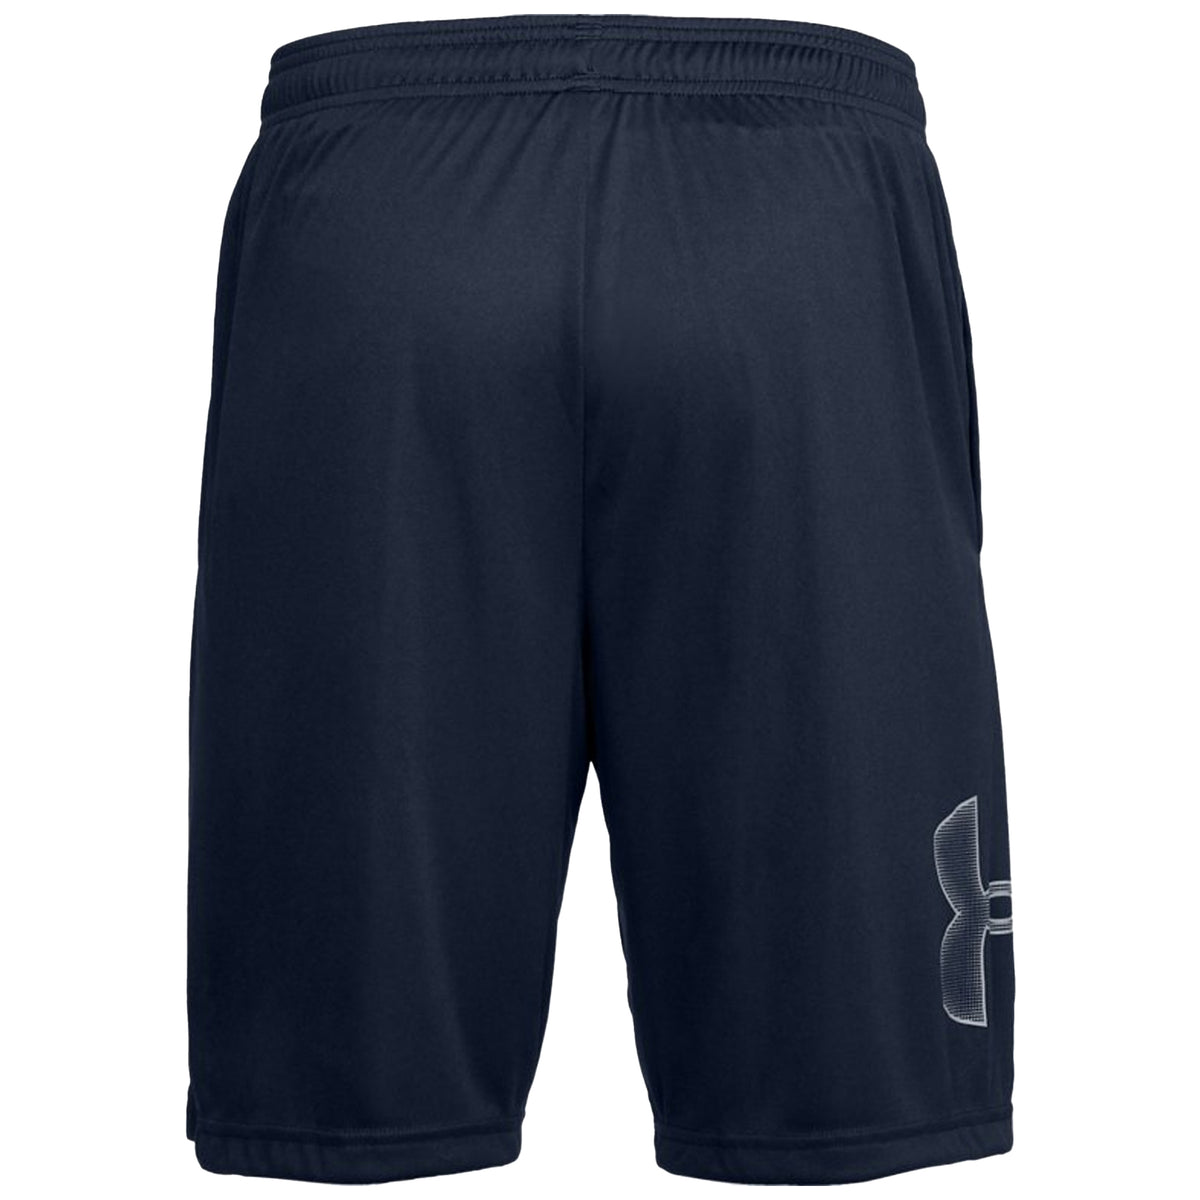 Under Armour Mens Tech Graphic Shorts: Academy/Steel